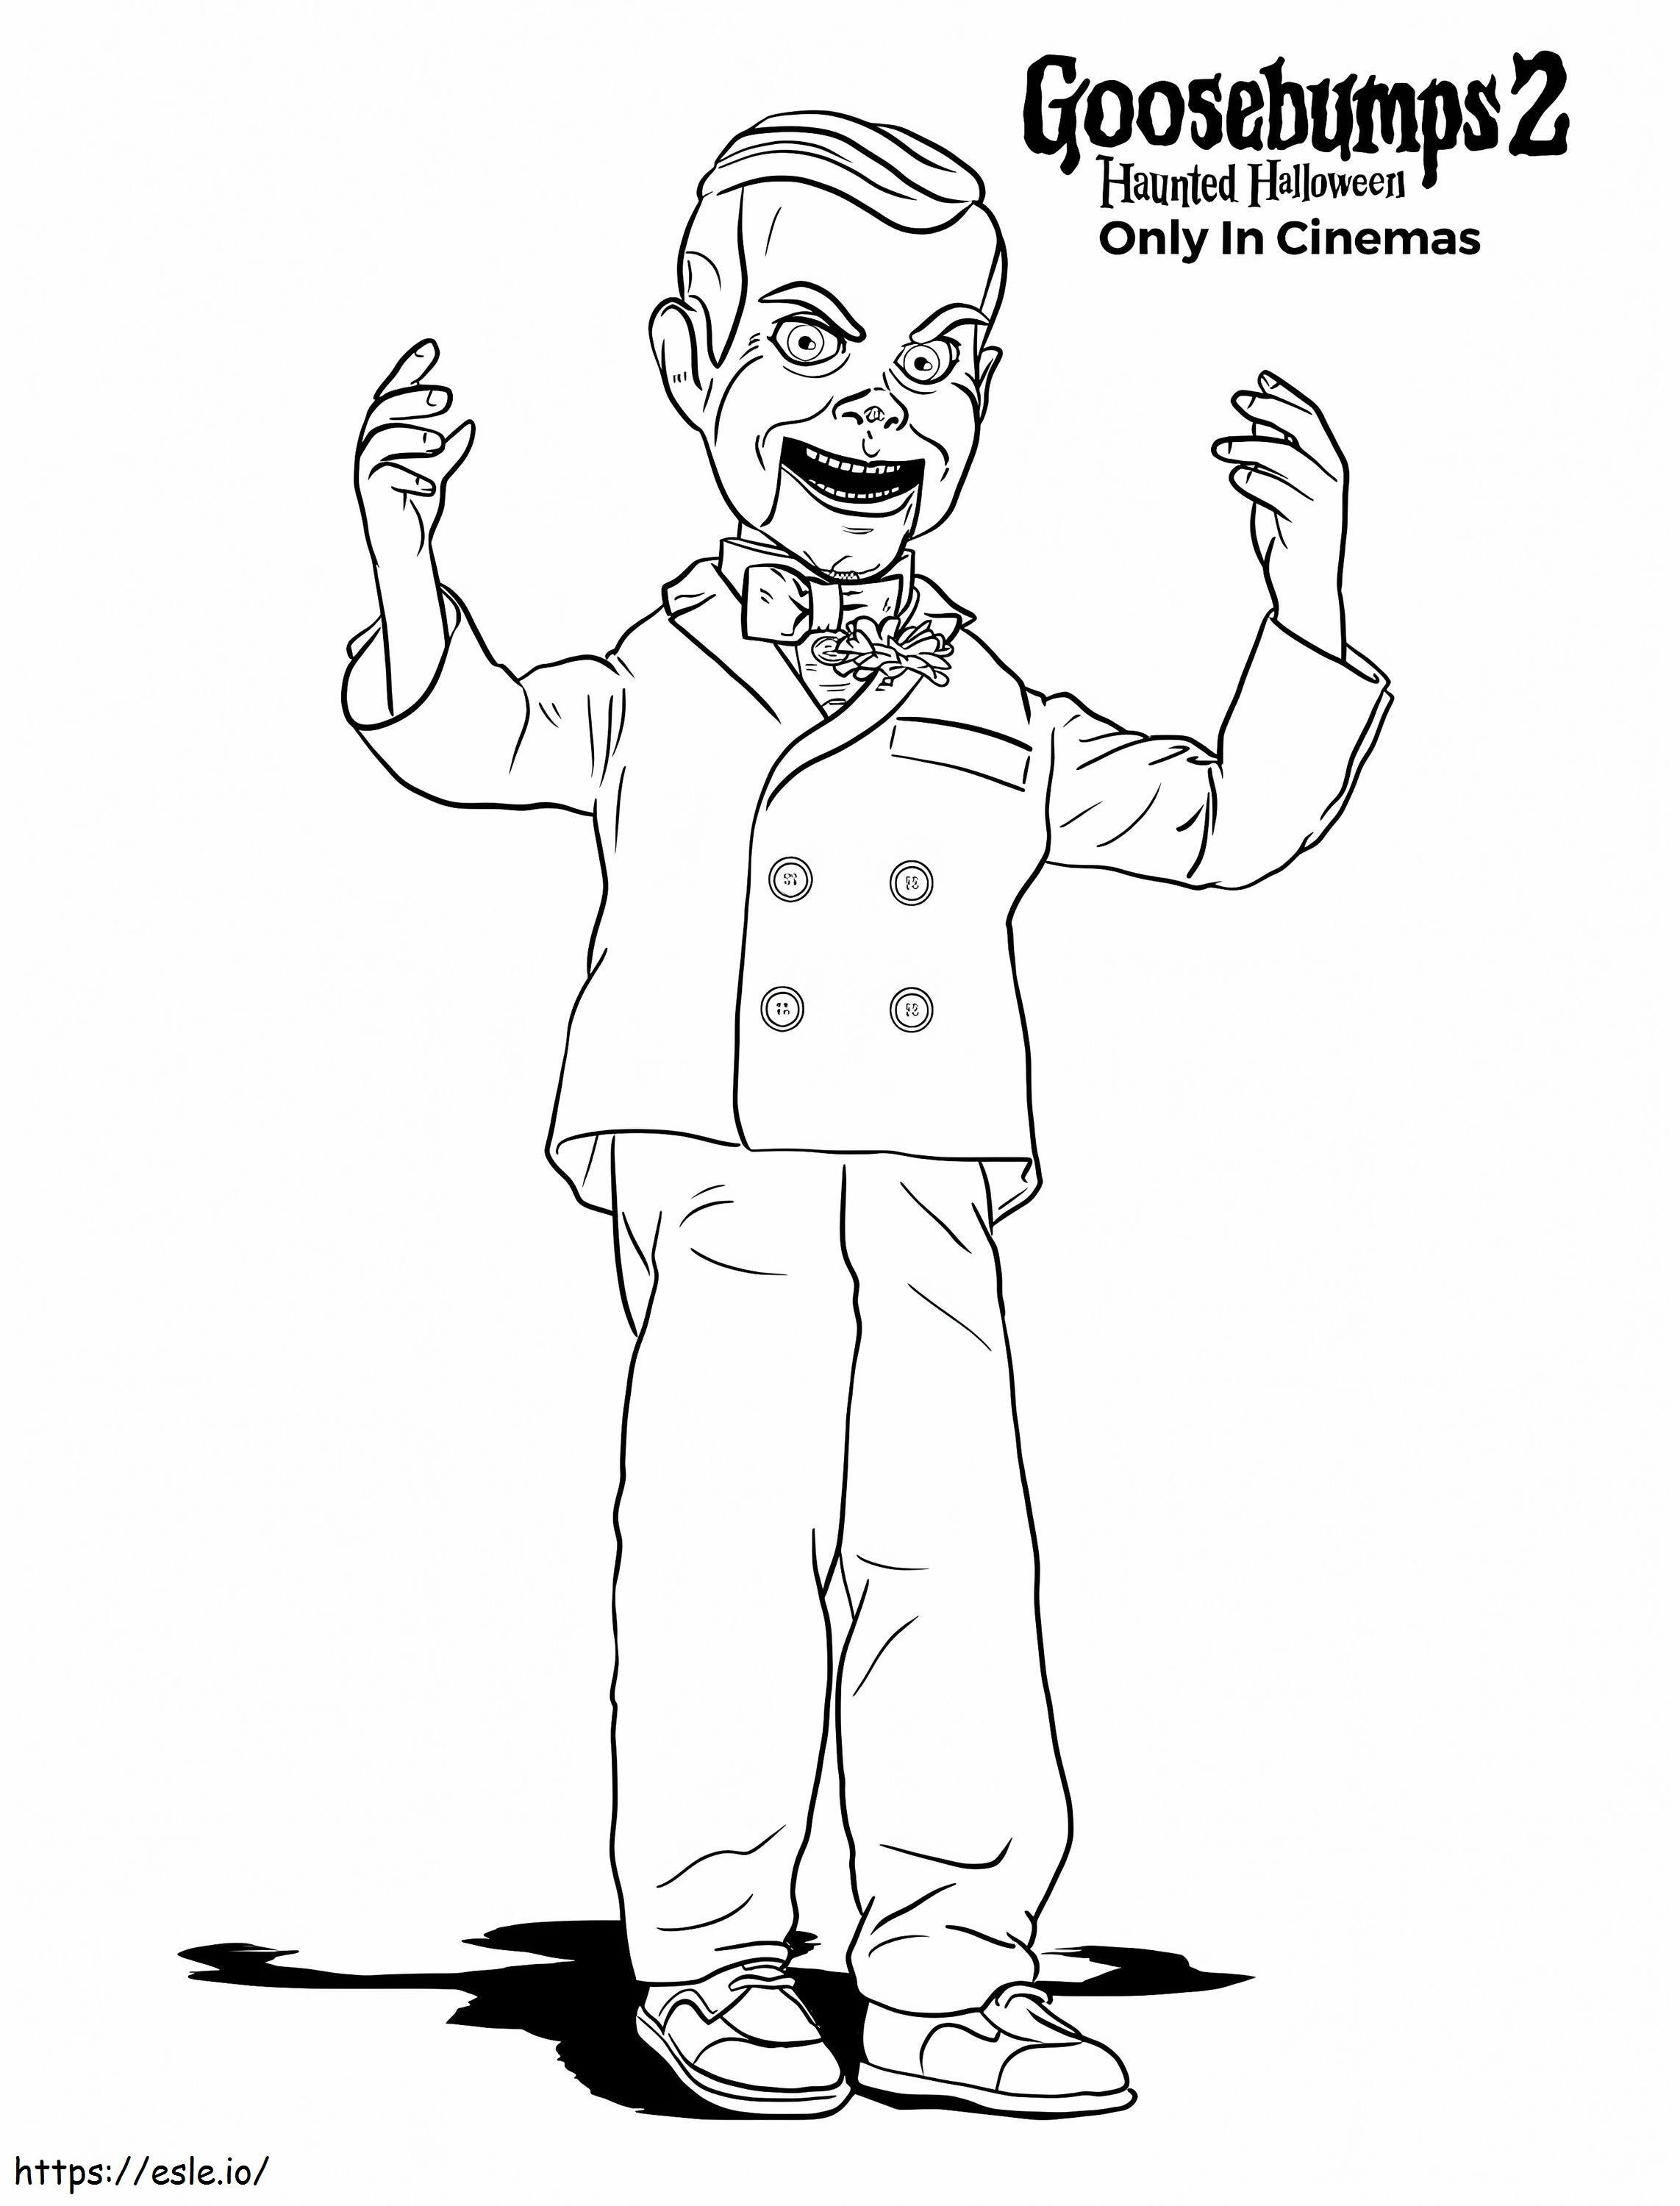 Slappy The Dummy From Goosebumps coloring page